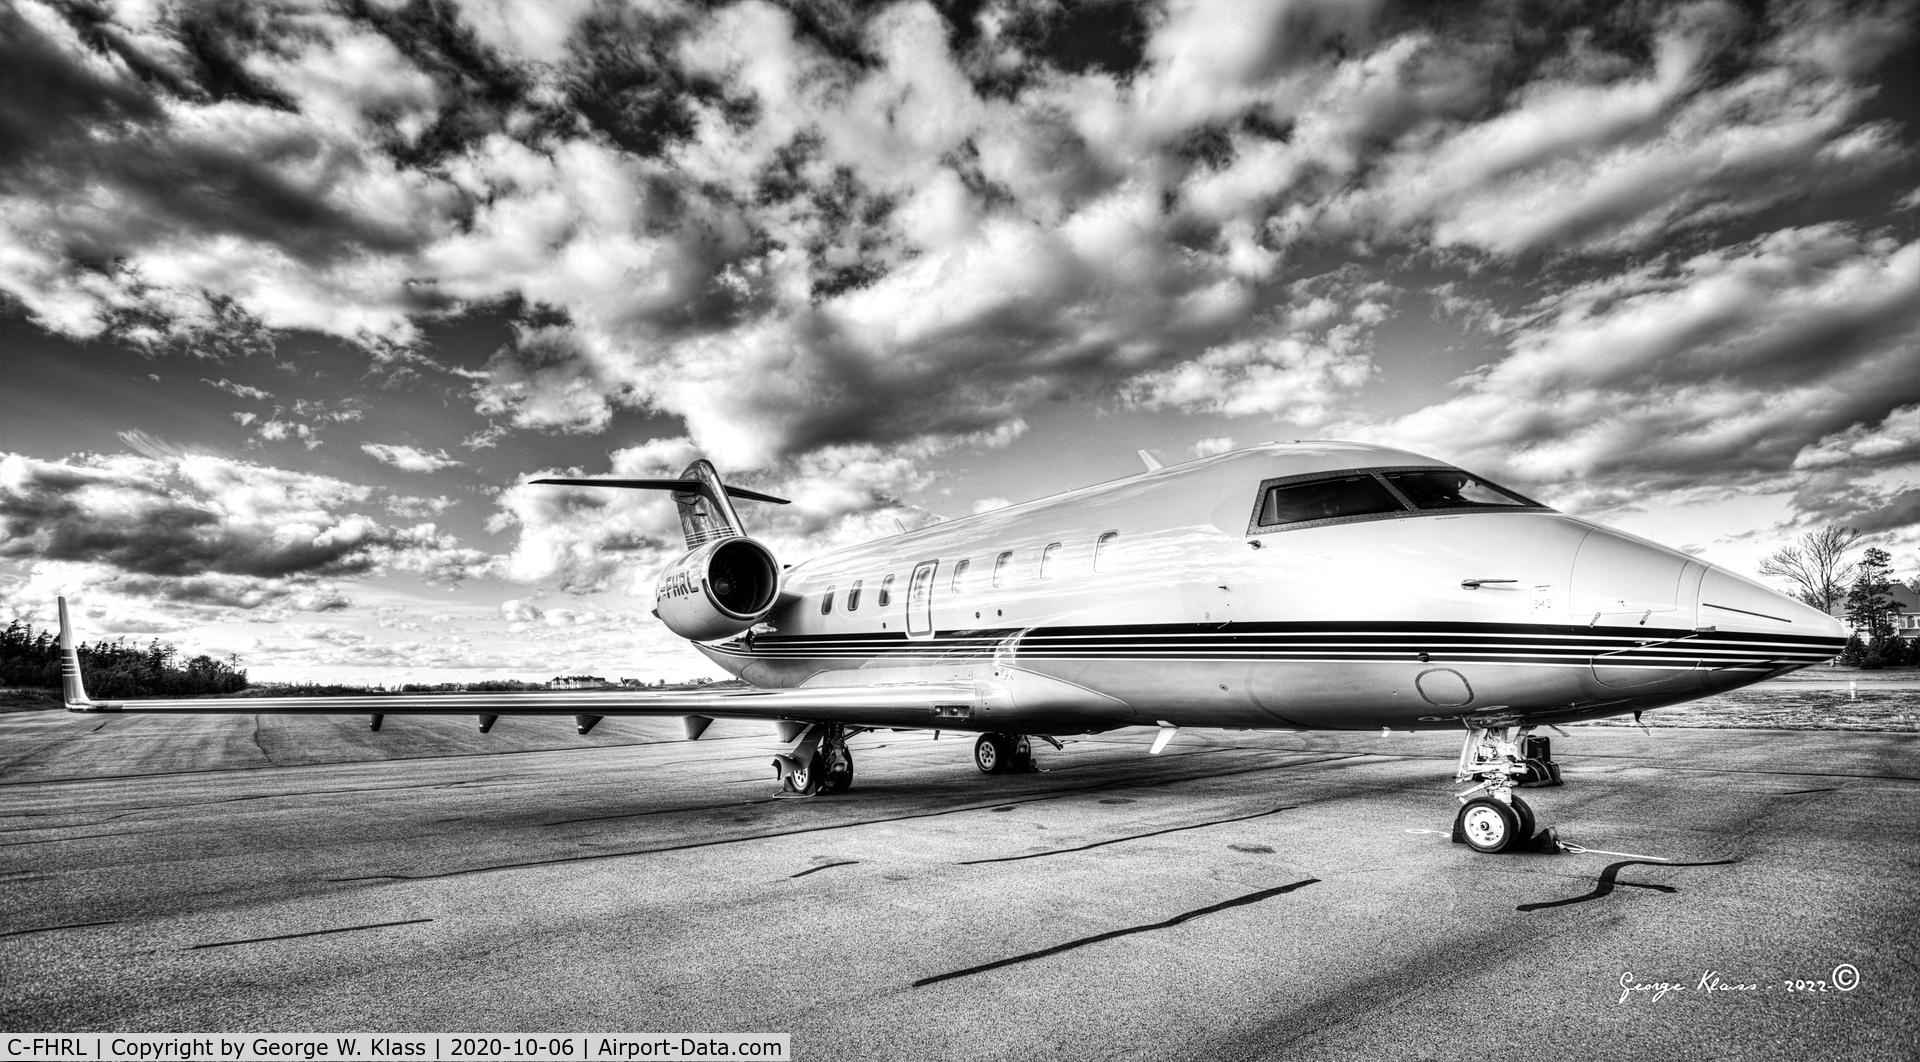 C-FHRL, 2013 Bombardier Challenger 604 (CL-600-2B16 C/N 5947, Taken at Fox Harbour private airport in Nova Scotia, Canada.